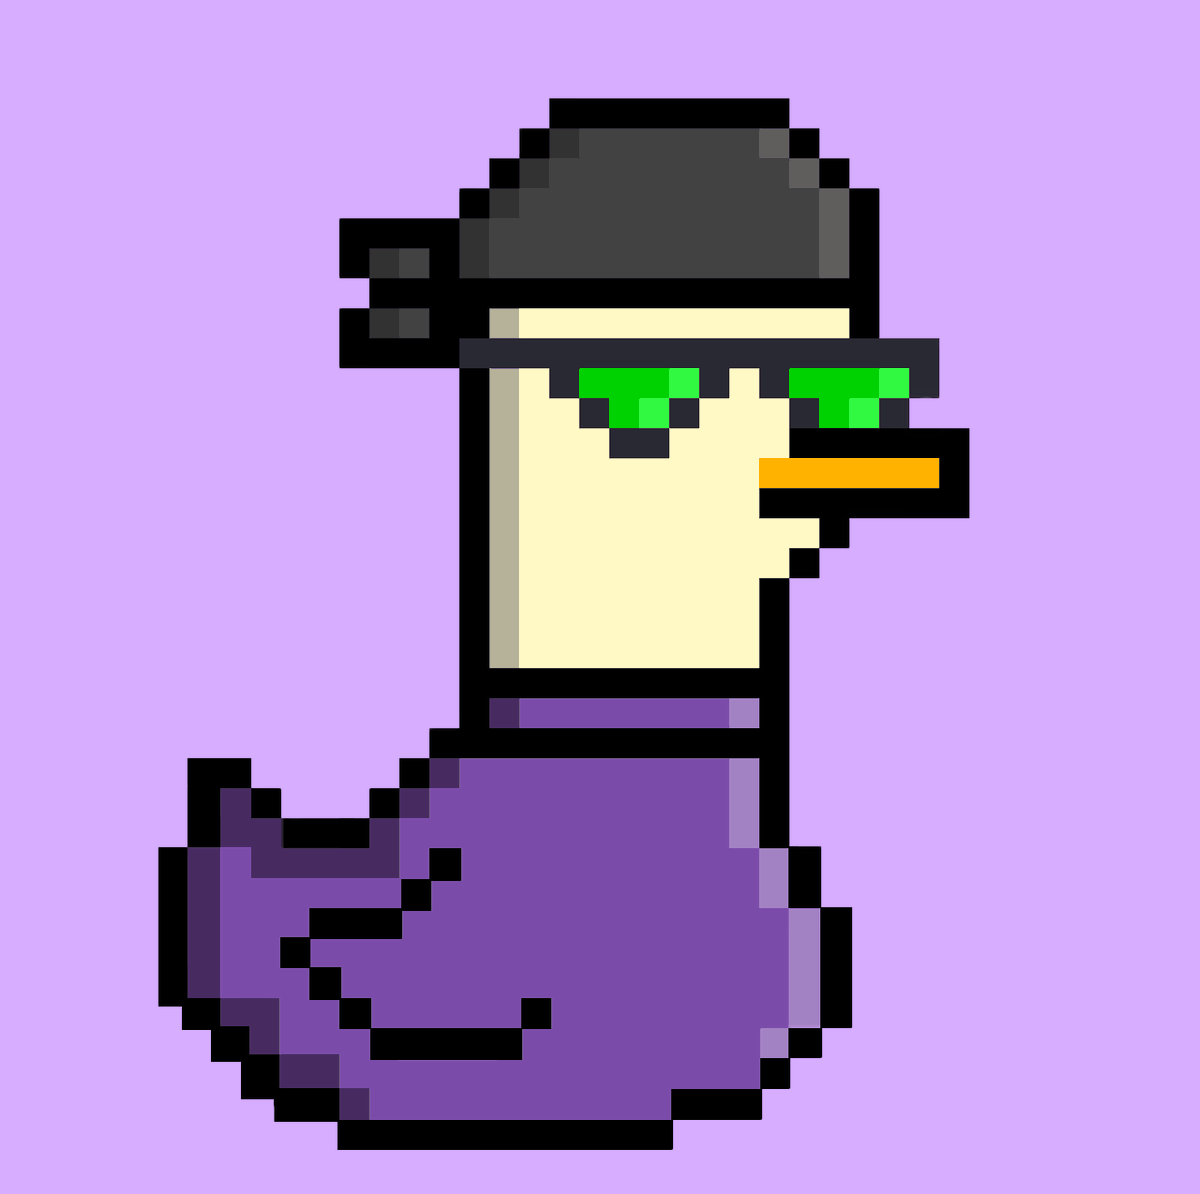 Day 10 flexing my favorite NFTs.

Meet Drake, the coolest feathered friend on this side of the web! 🏍️🐦 
With his sleek black bandana and snazzy purple turtleneck, he's ready to take on the day. No bling needed when you've got this much style.

@ElrondDucks #theducks